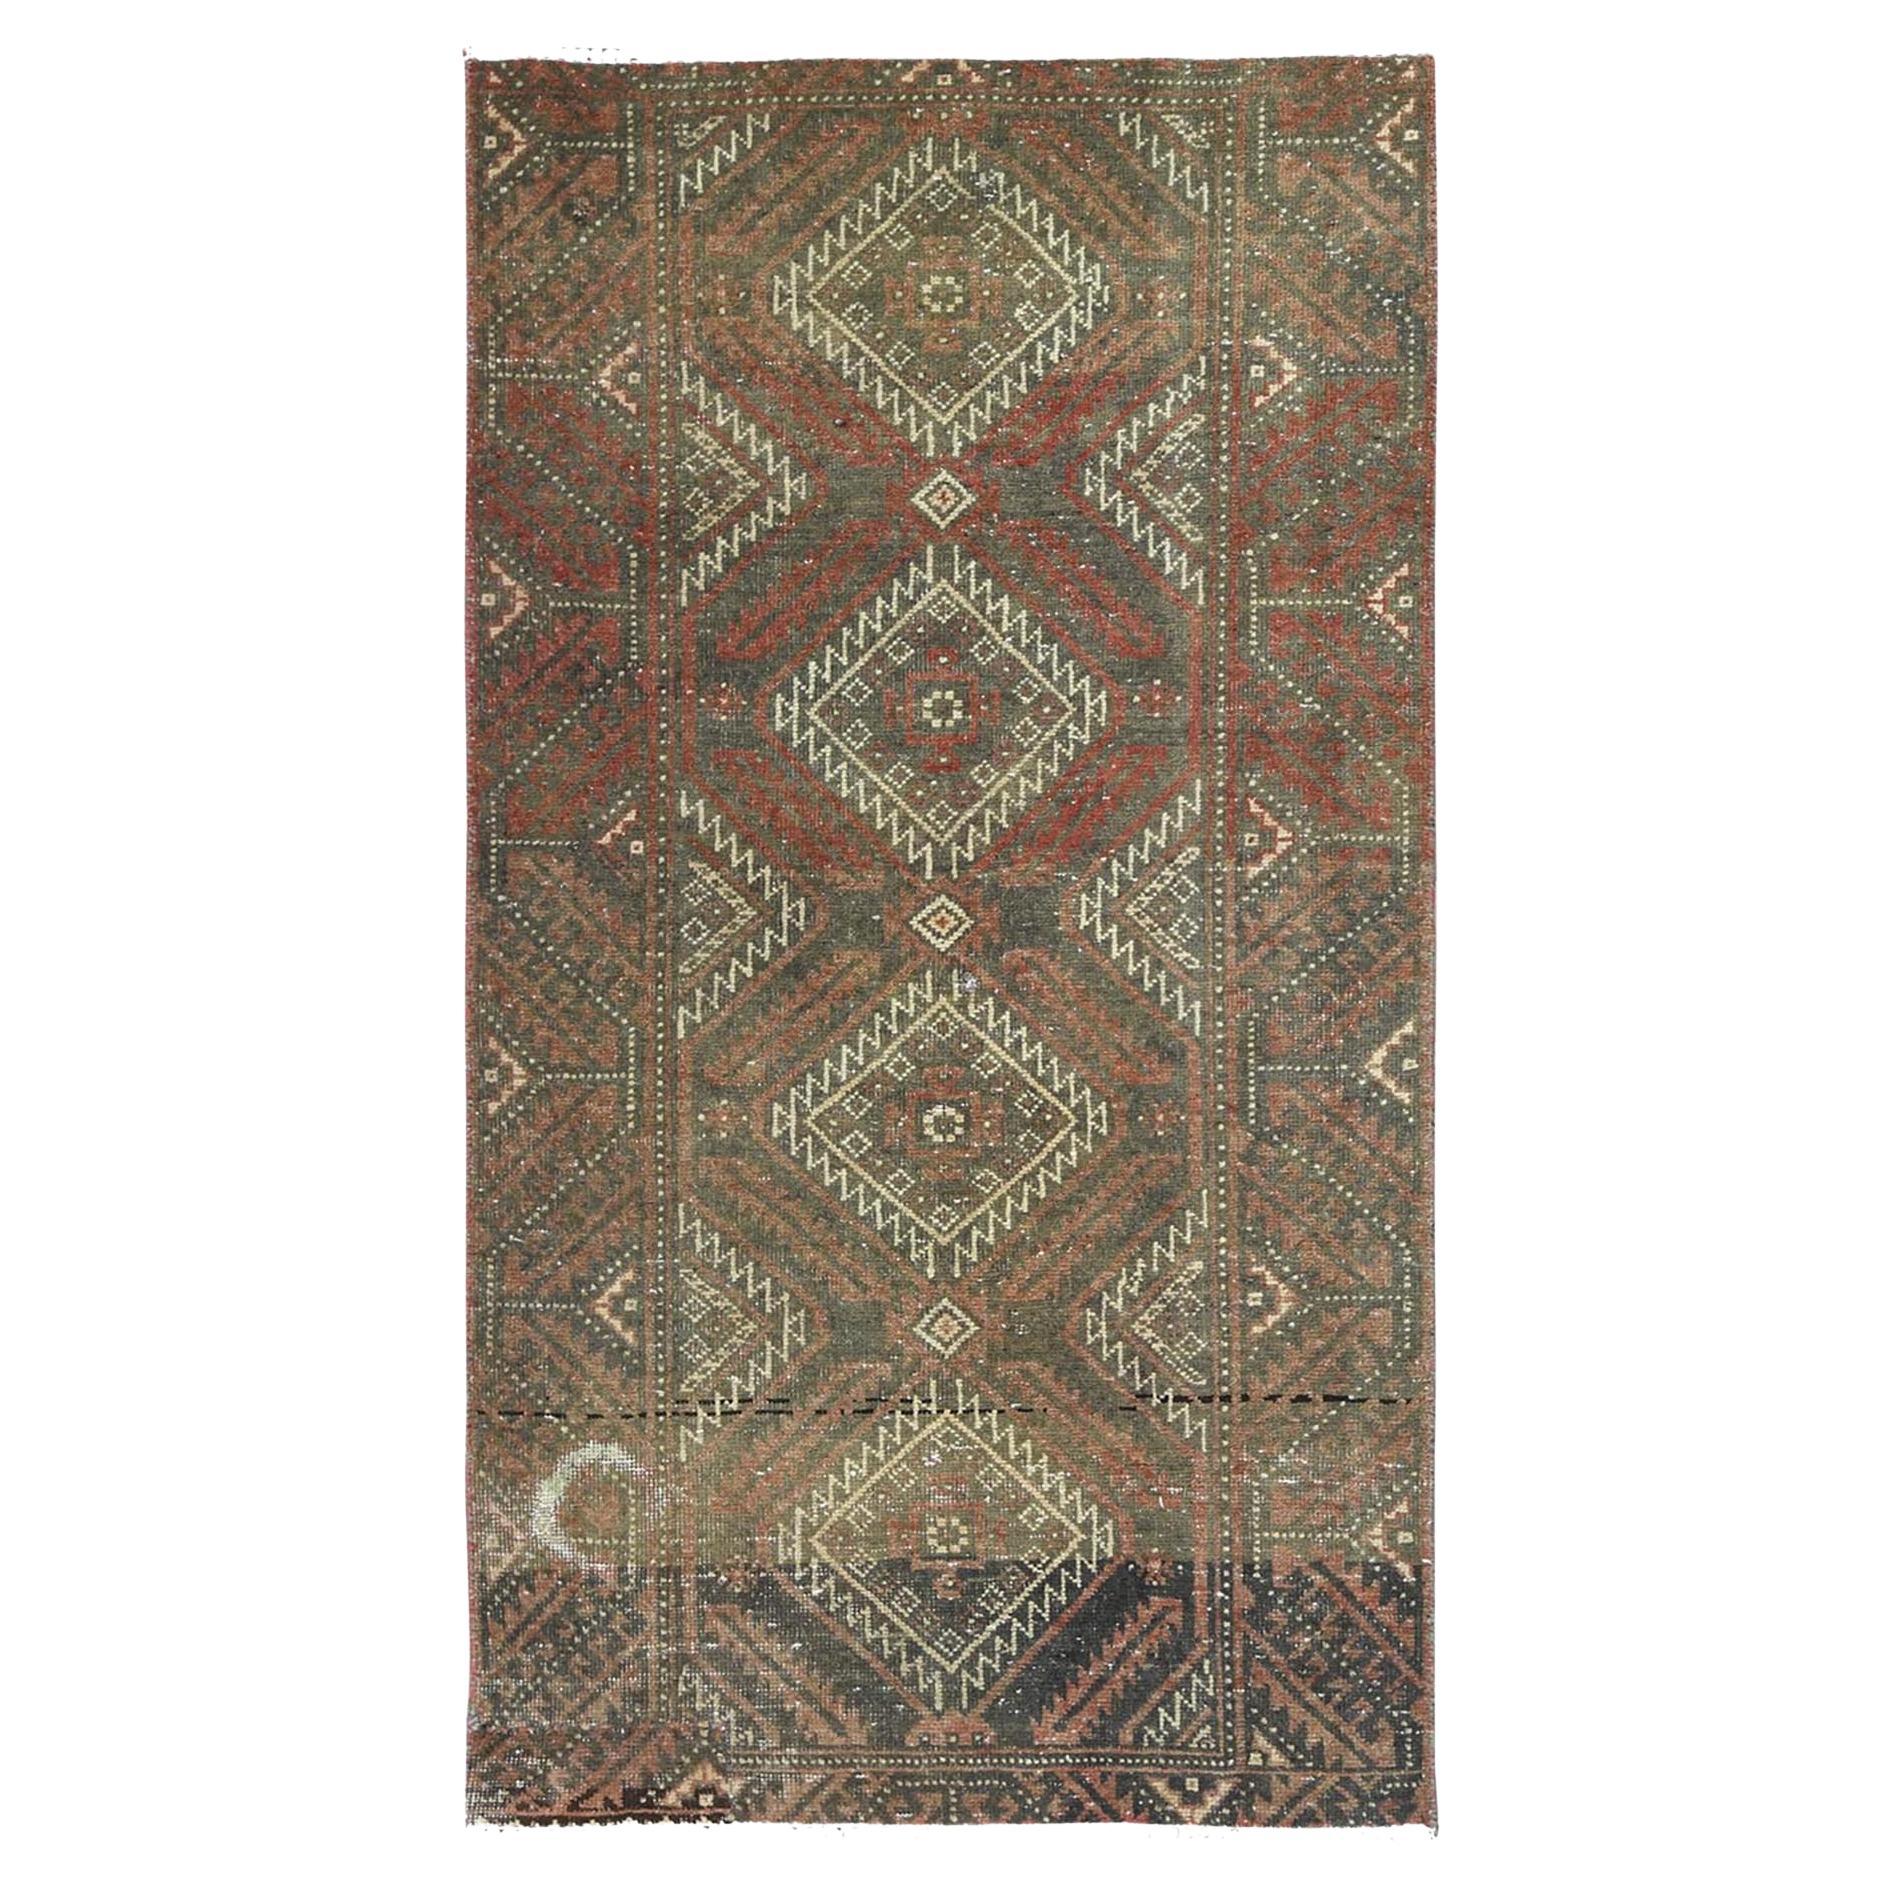 Burnt Umber Brown Bohemian Old Persian Baluch Worn Wool Hand Knotted Runner Rug